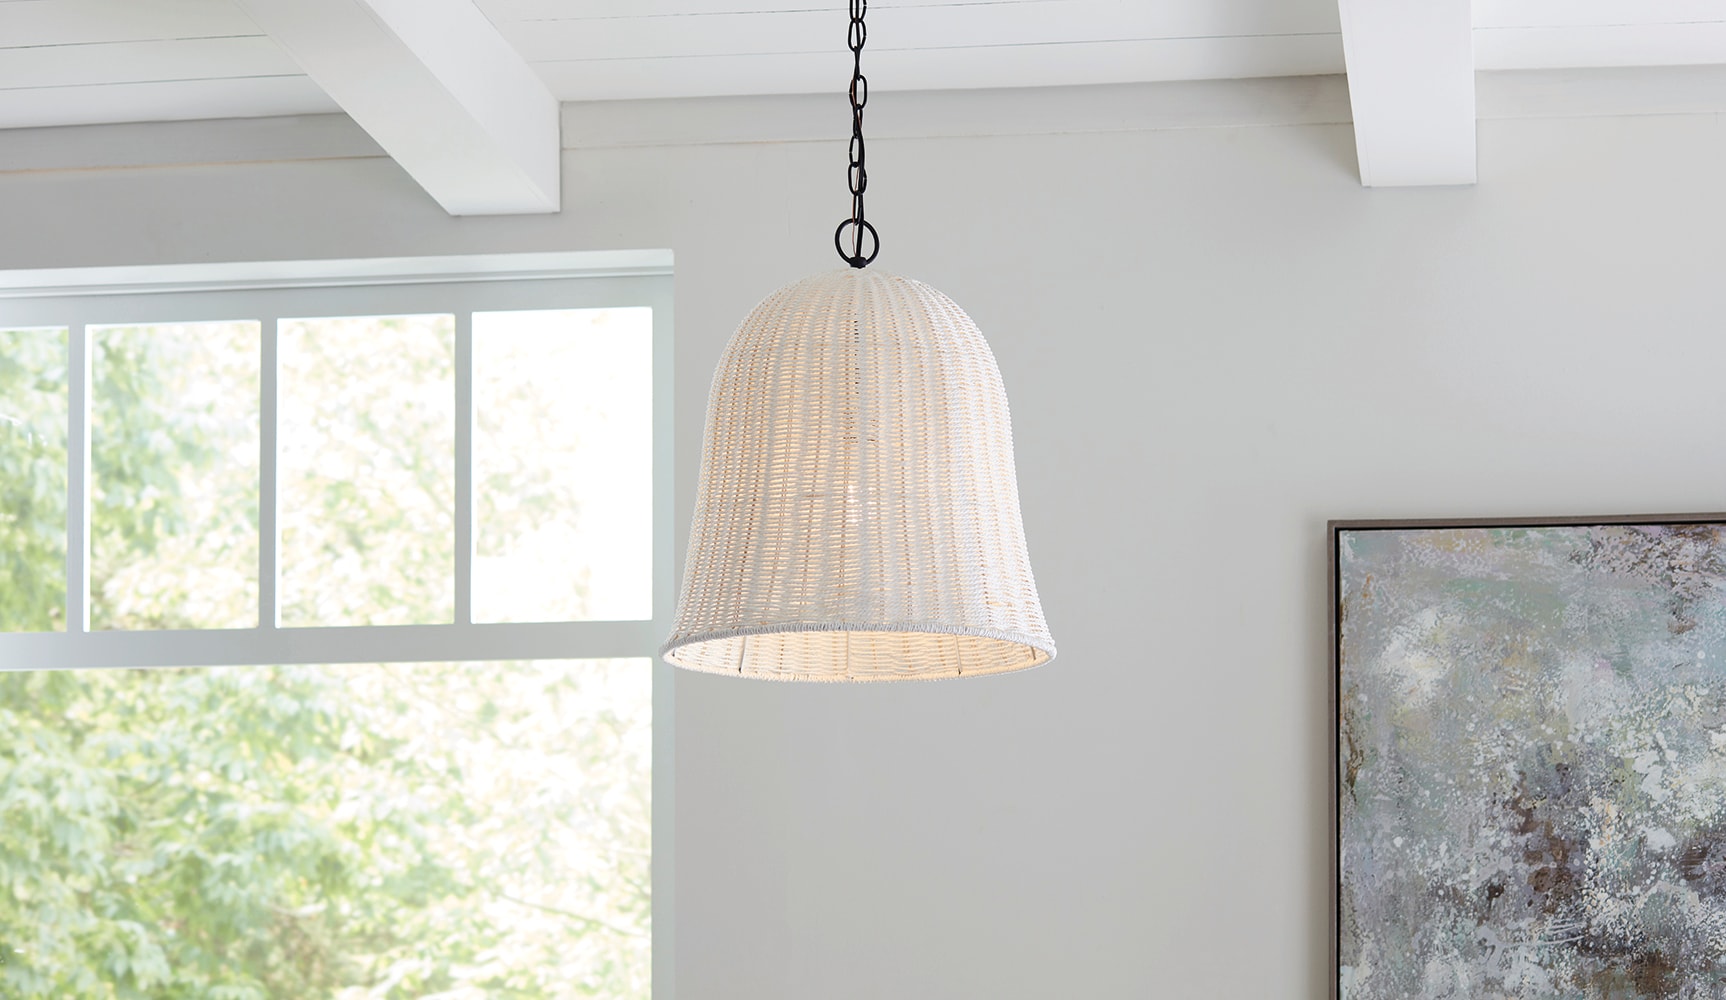 Elizabeth Black Canopy with White Rattan Shade Modern/Contemporary Bell Hanging Pendant Light | - allen + roth KOQ4901AX-01